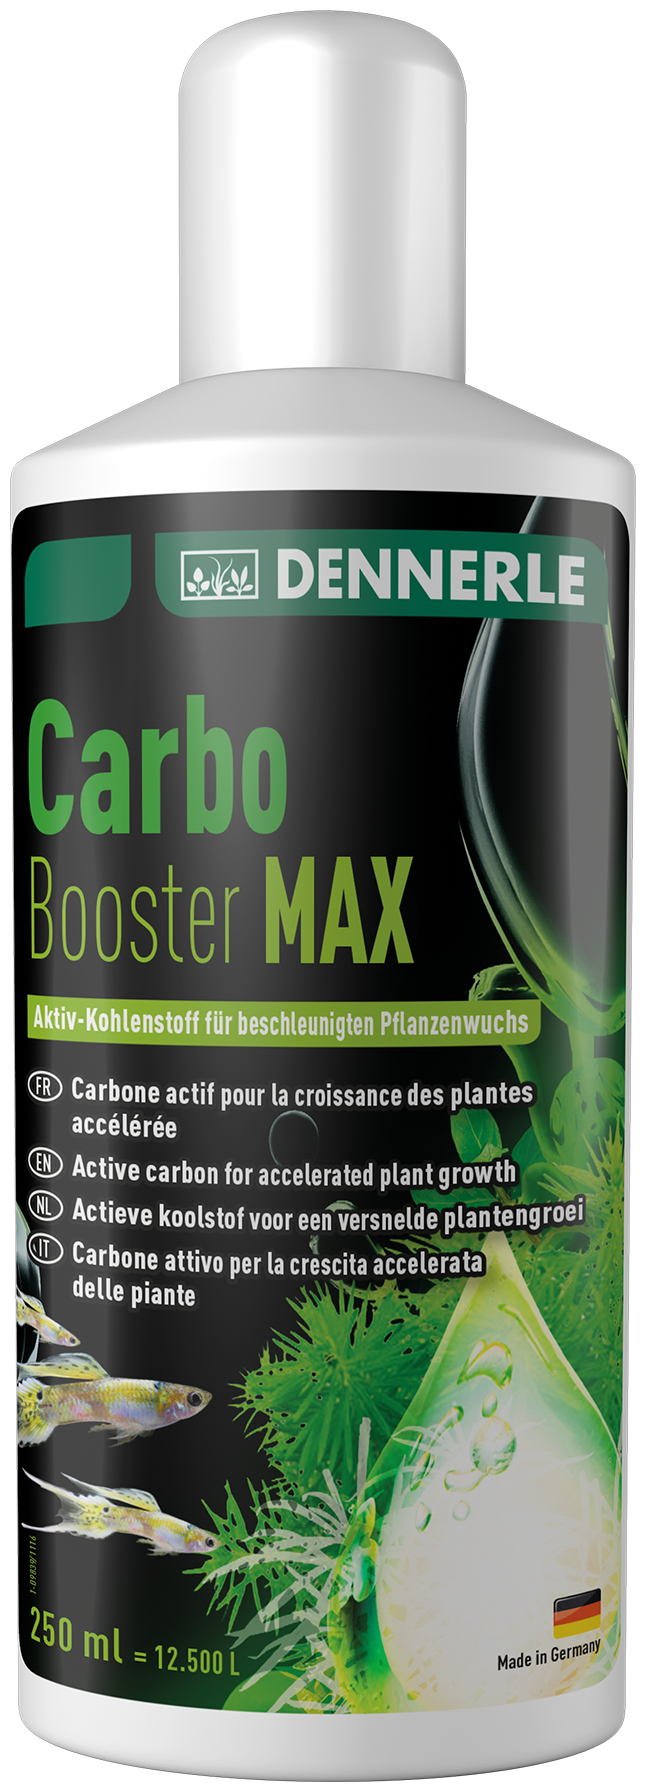    Dennerle Carbo Booster Max, 250 